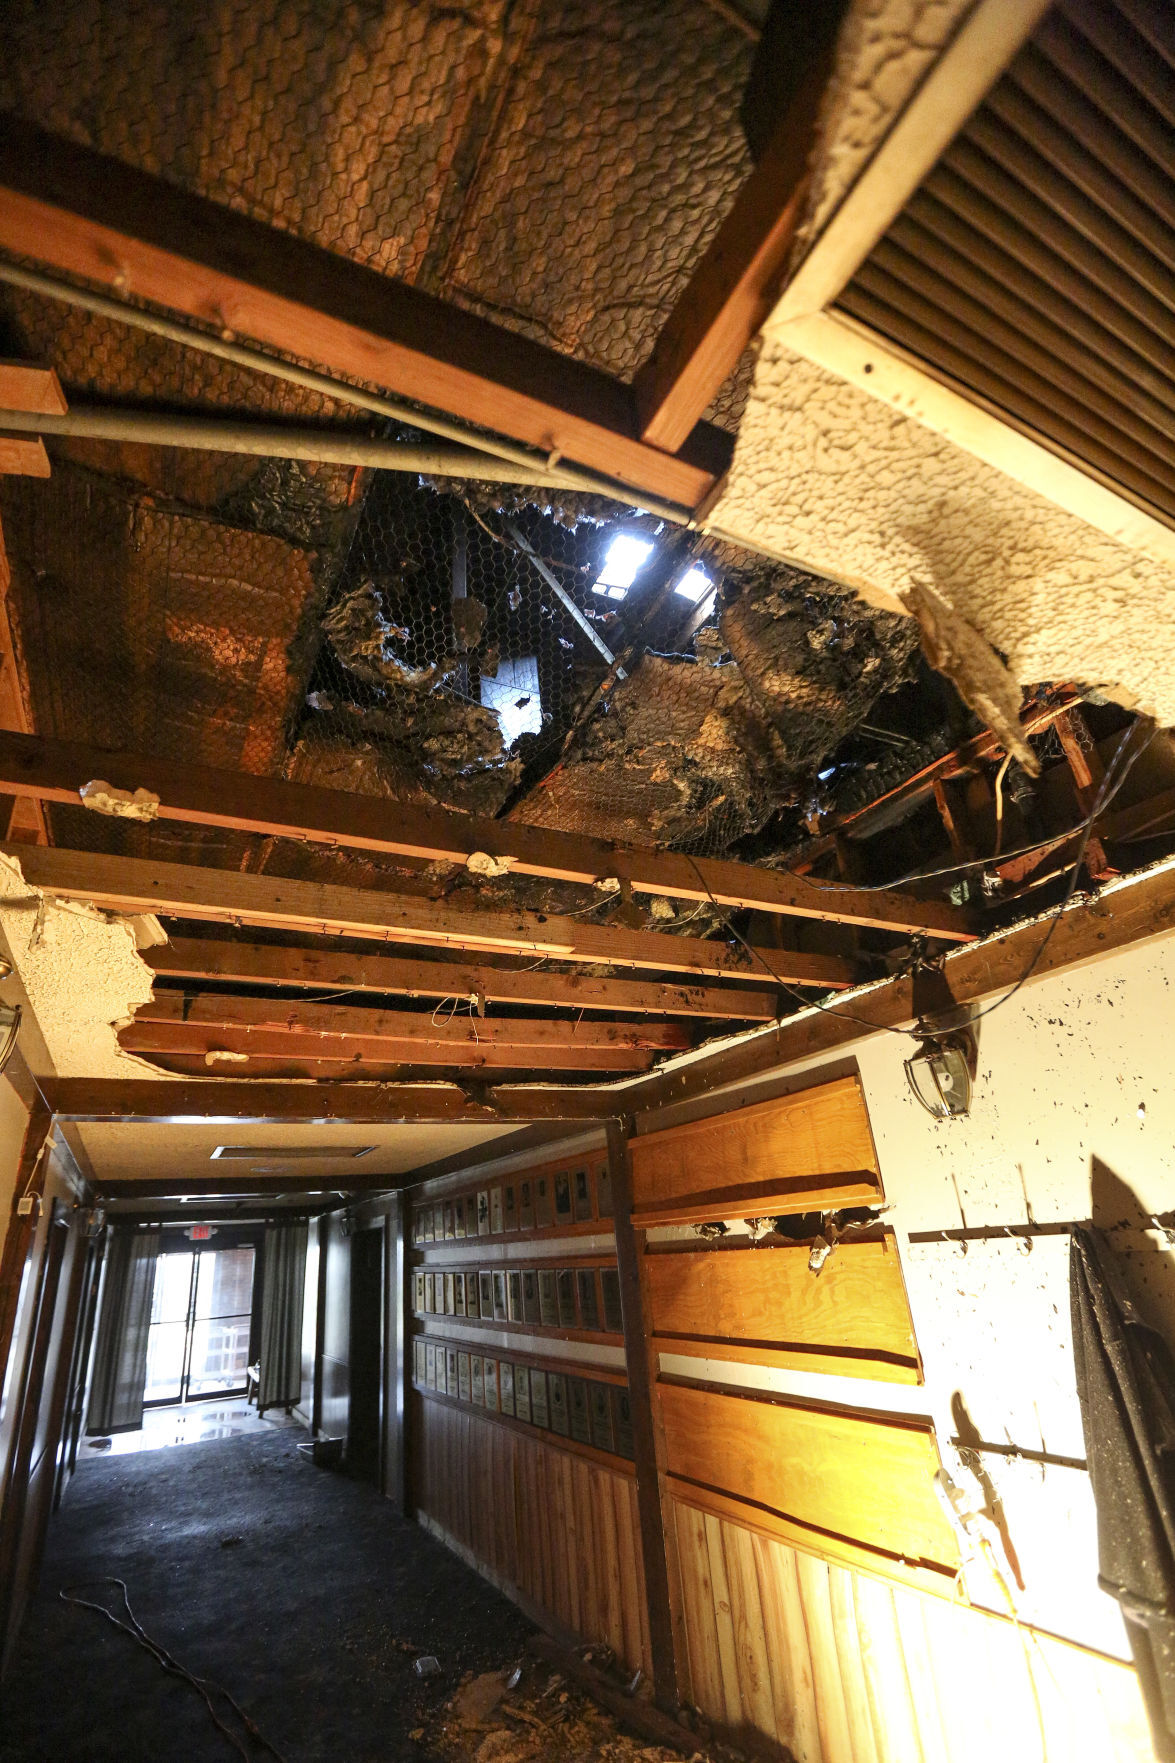 Damage from fire can be seen on the ceiling of Pioneer Lanes Bar, Grill & Banquet Center in Platteville, Wis., on Sunday PHOTO CREDIT: Dave Kettering